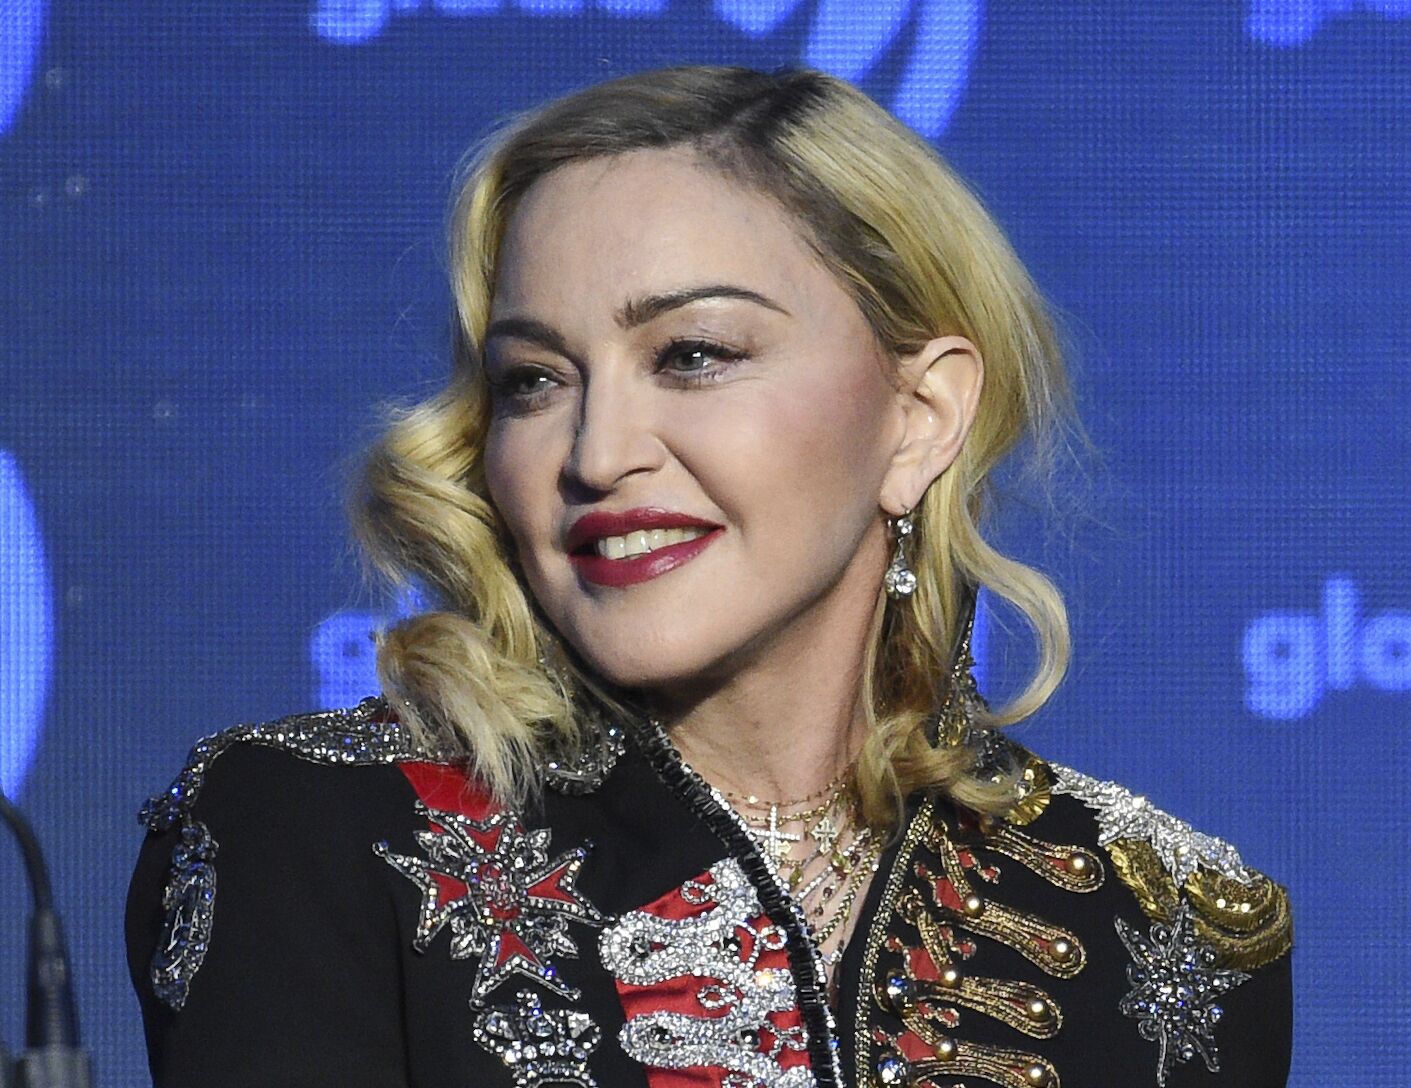 Madonna postpones upcoming Celebration tour due to ‘serious bacterial infection’